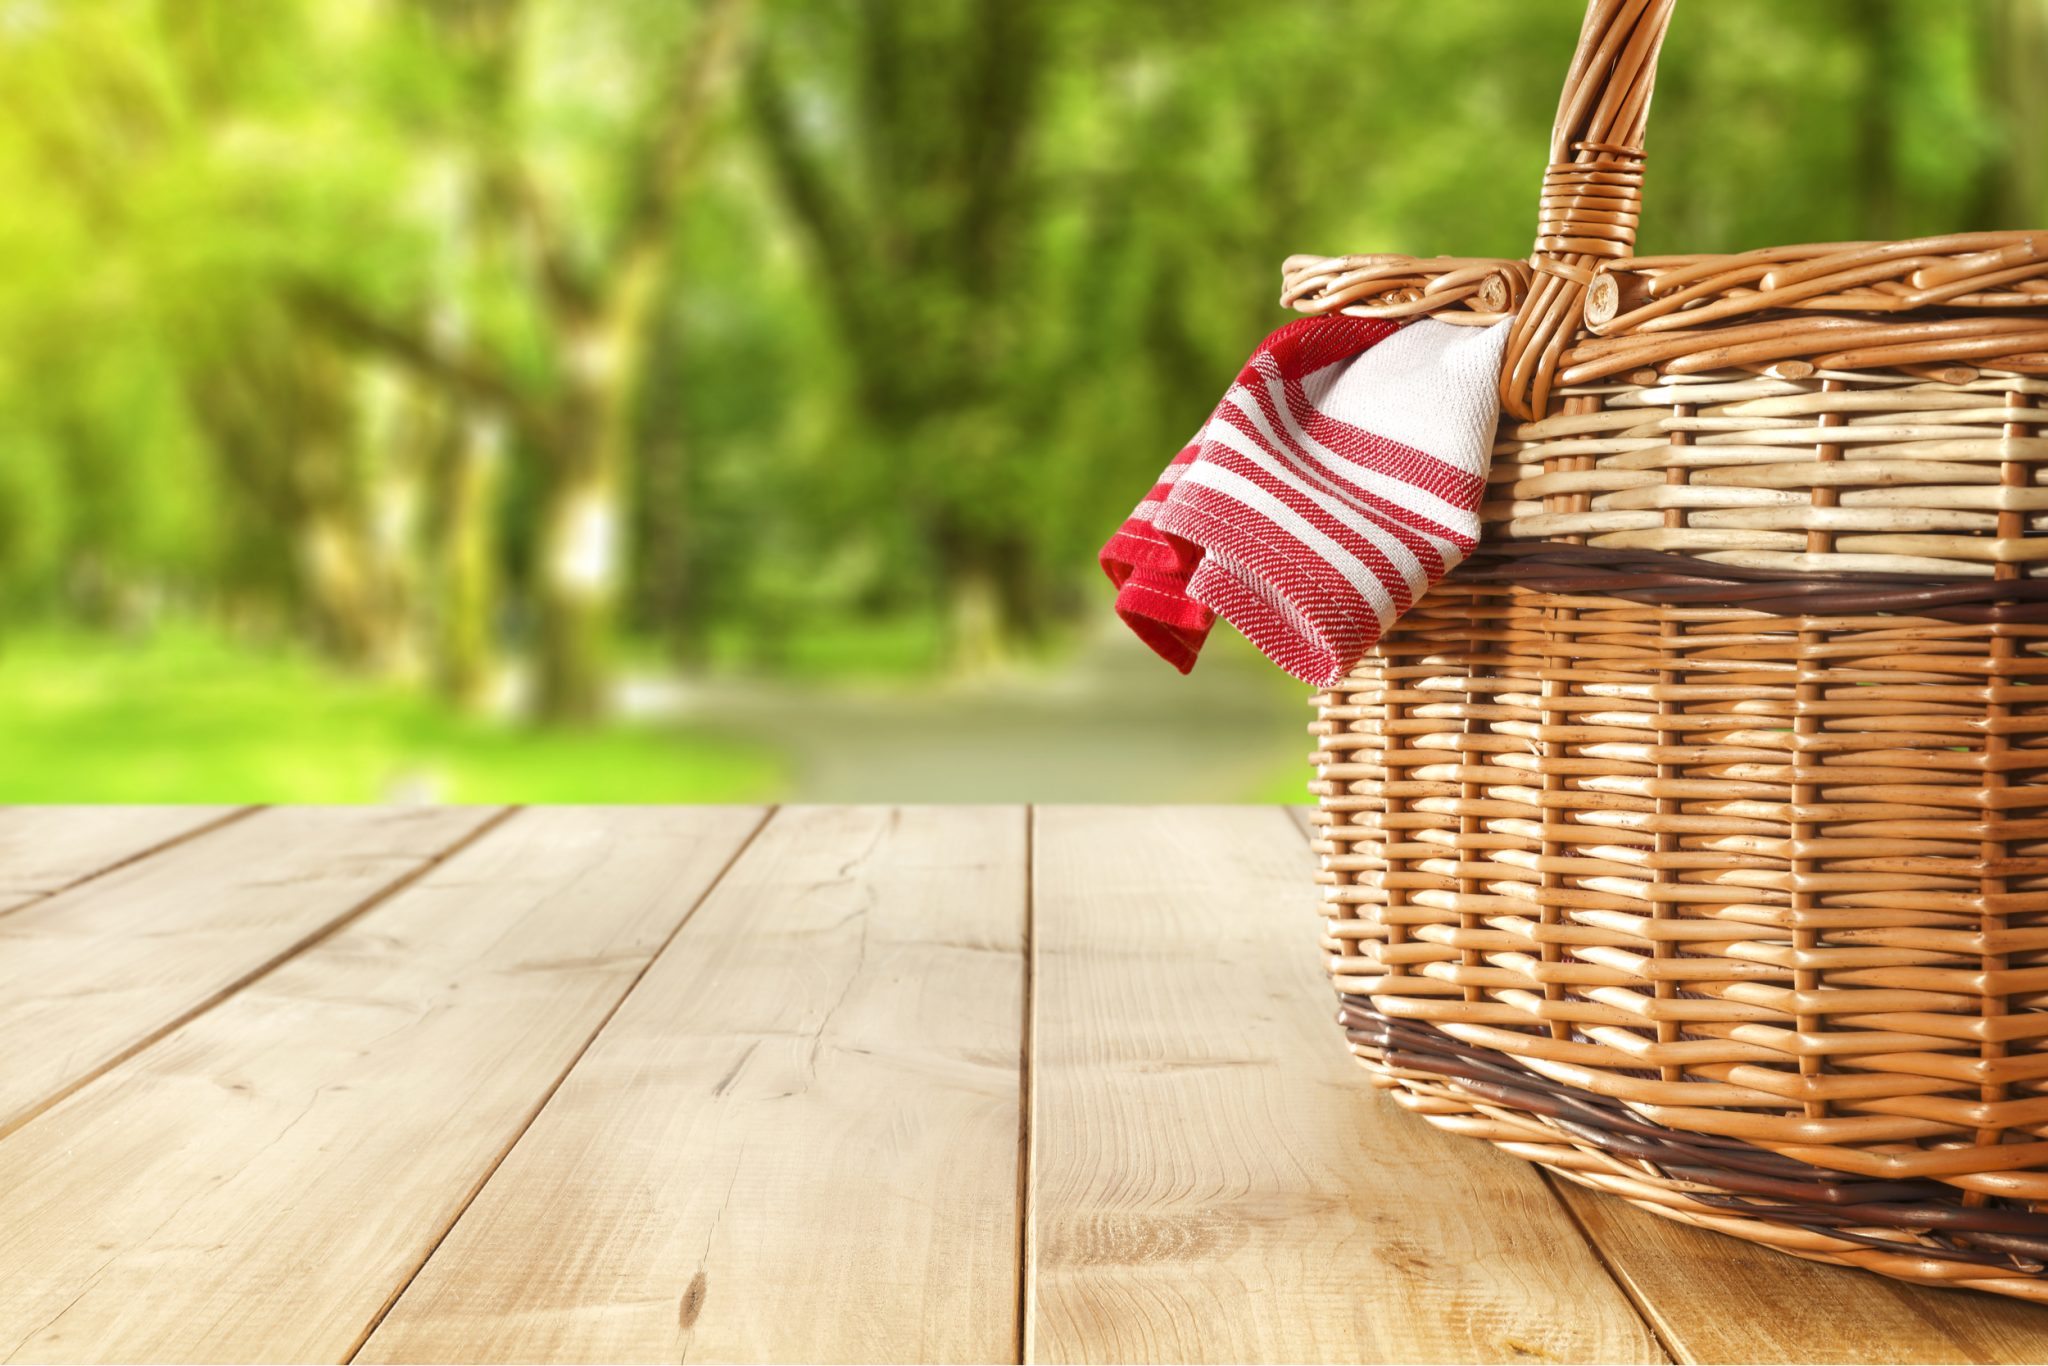 How to Pack the Perfect Picnic Basket